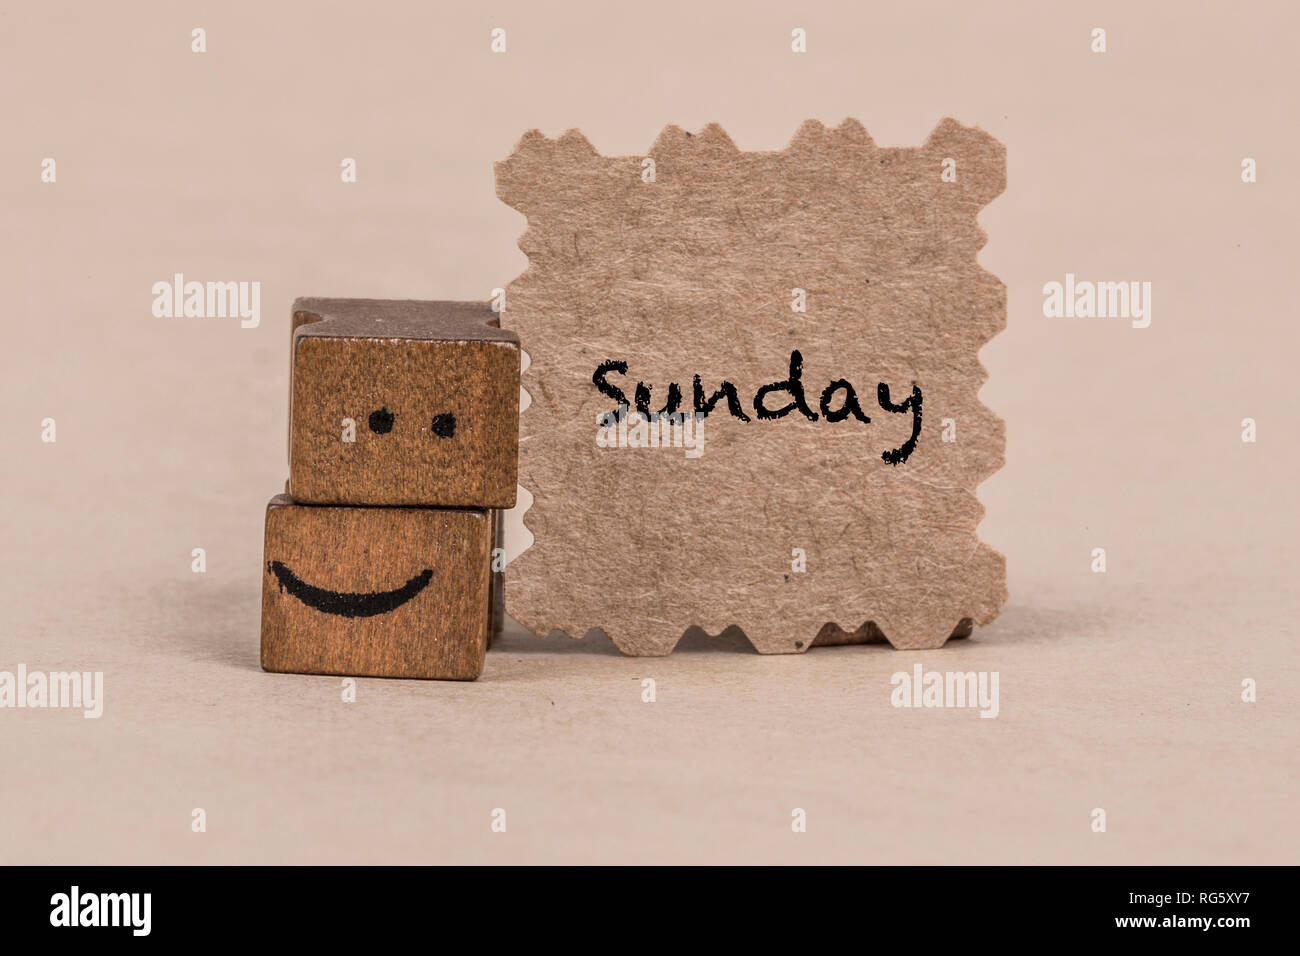 template for sunday with smiley face icon Stock Photo